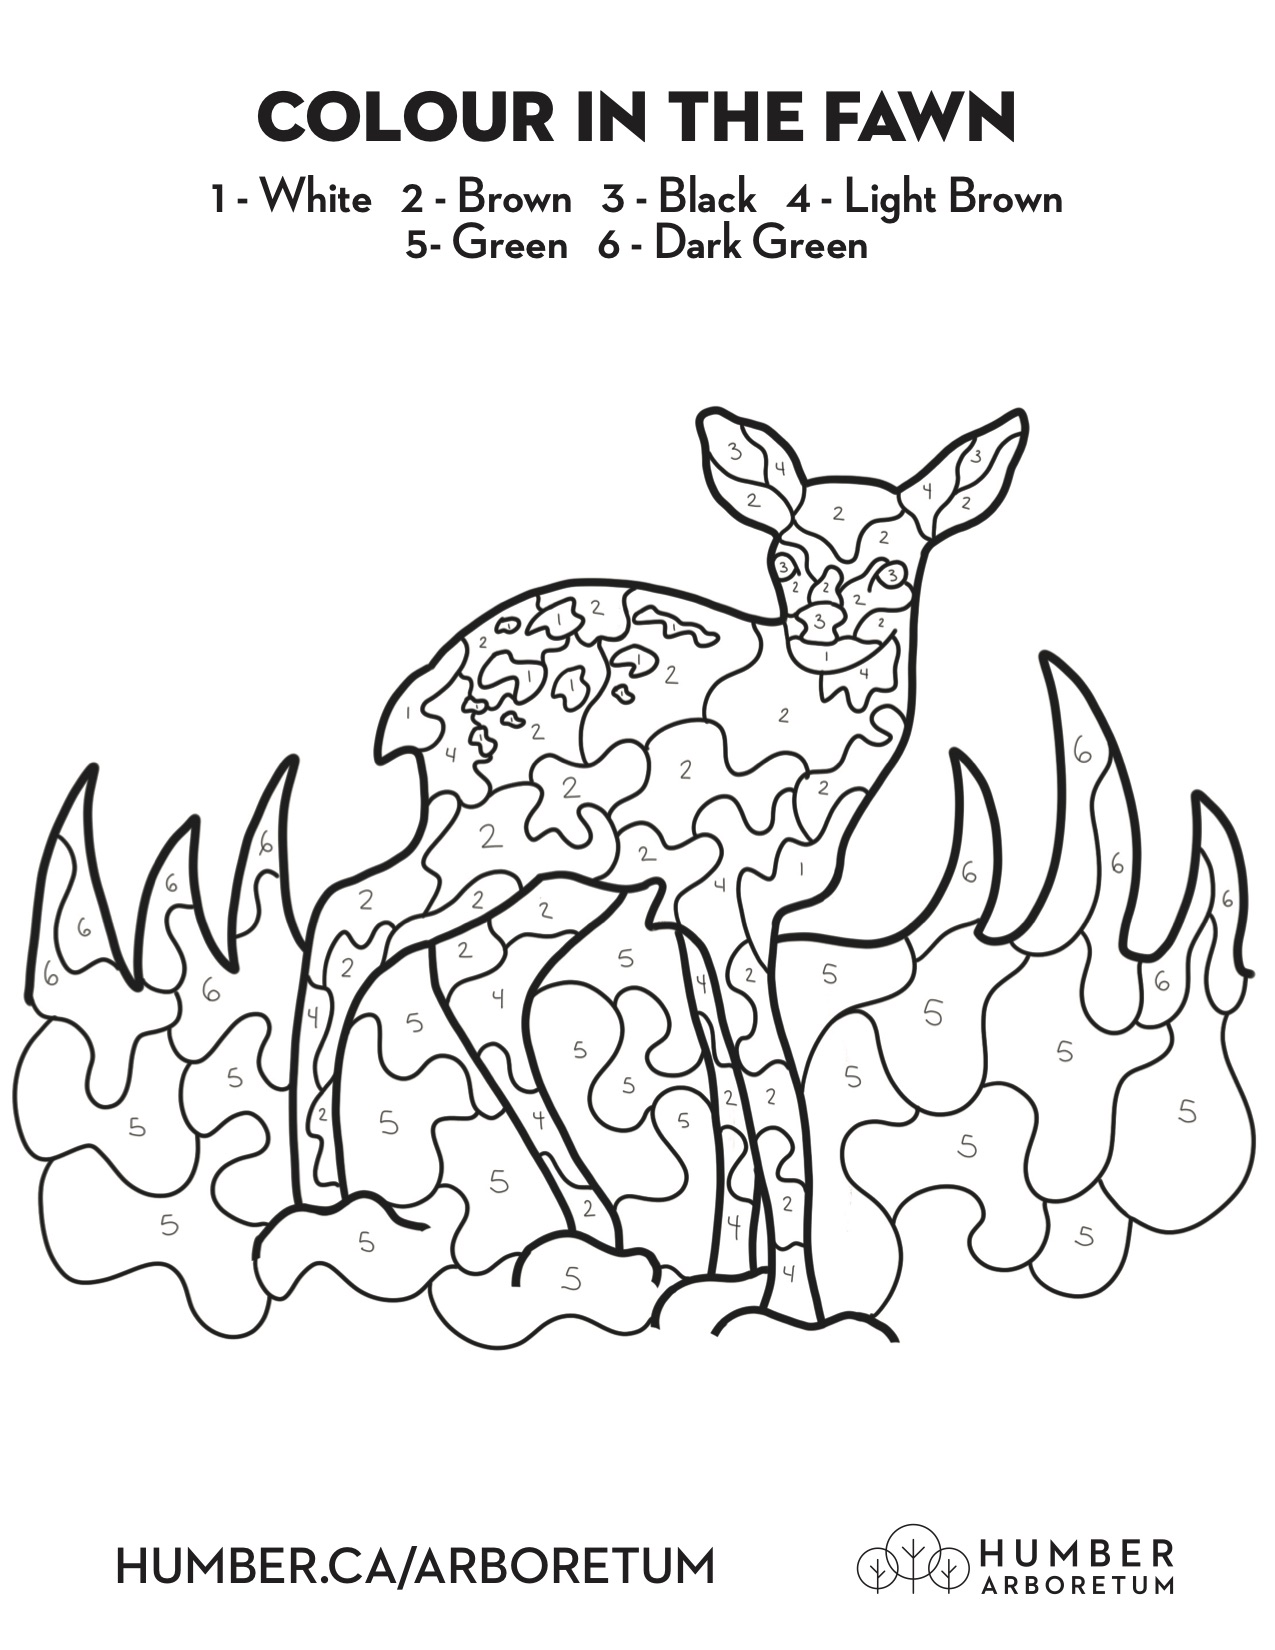 A fawn colour-by-number page